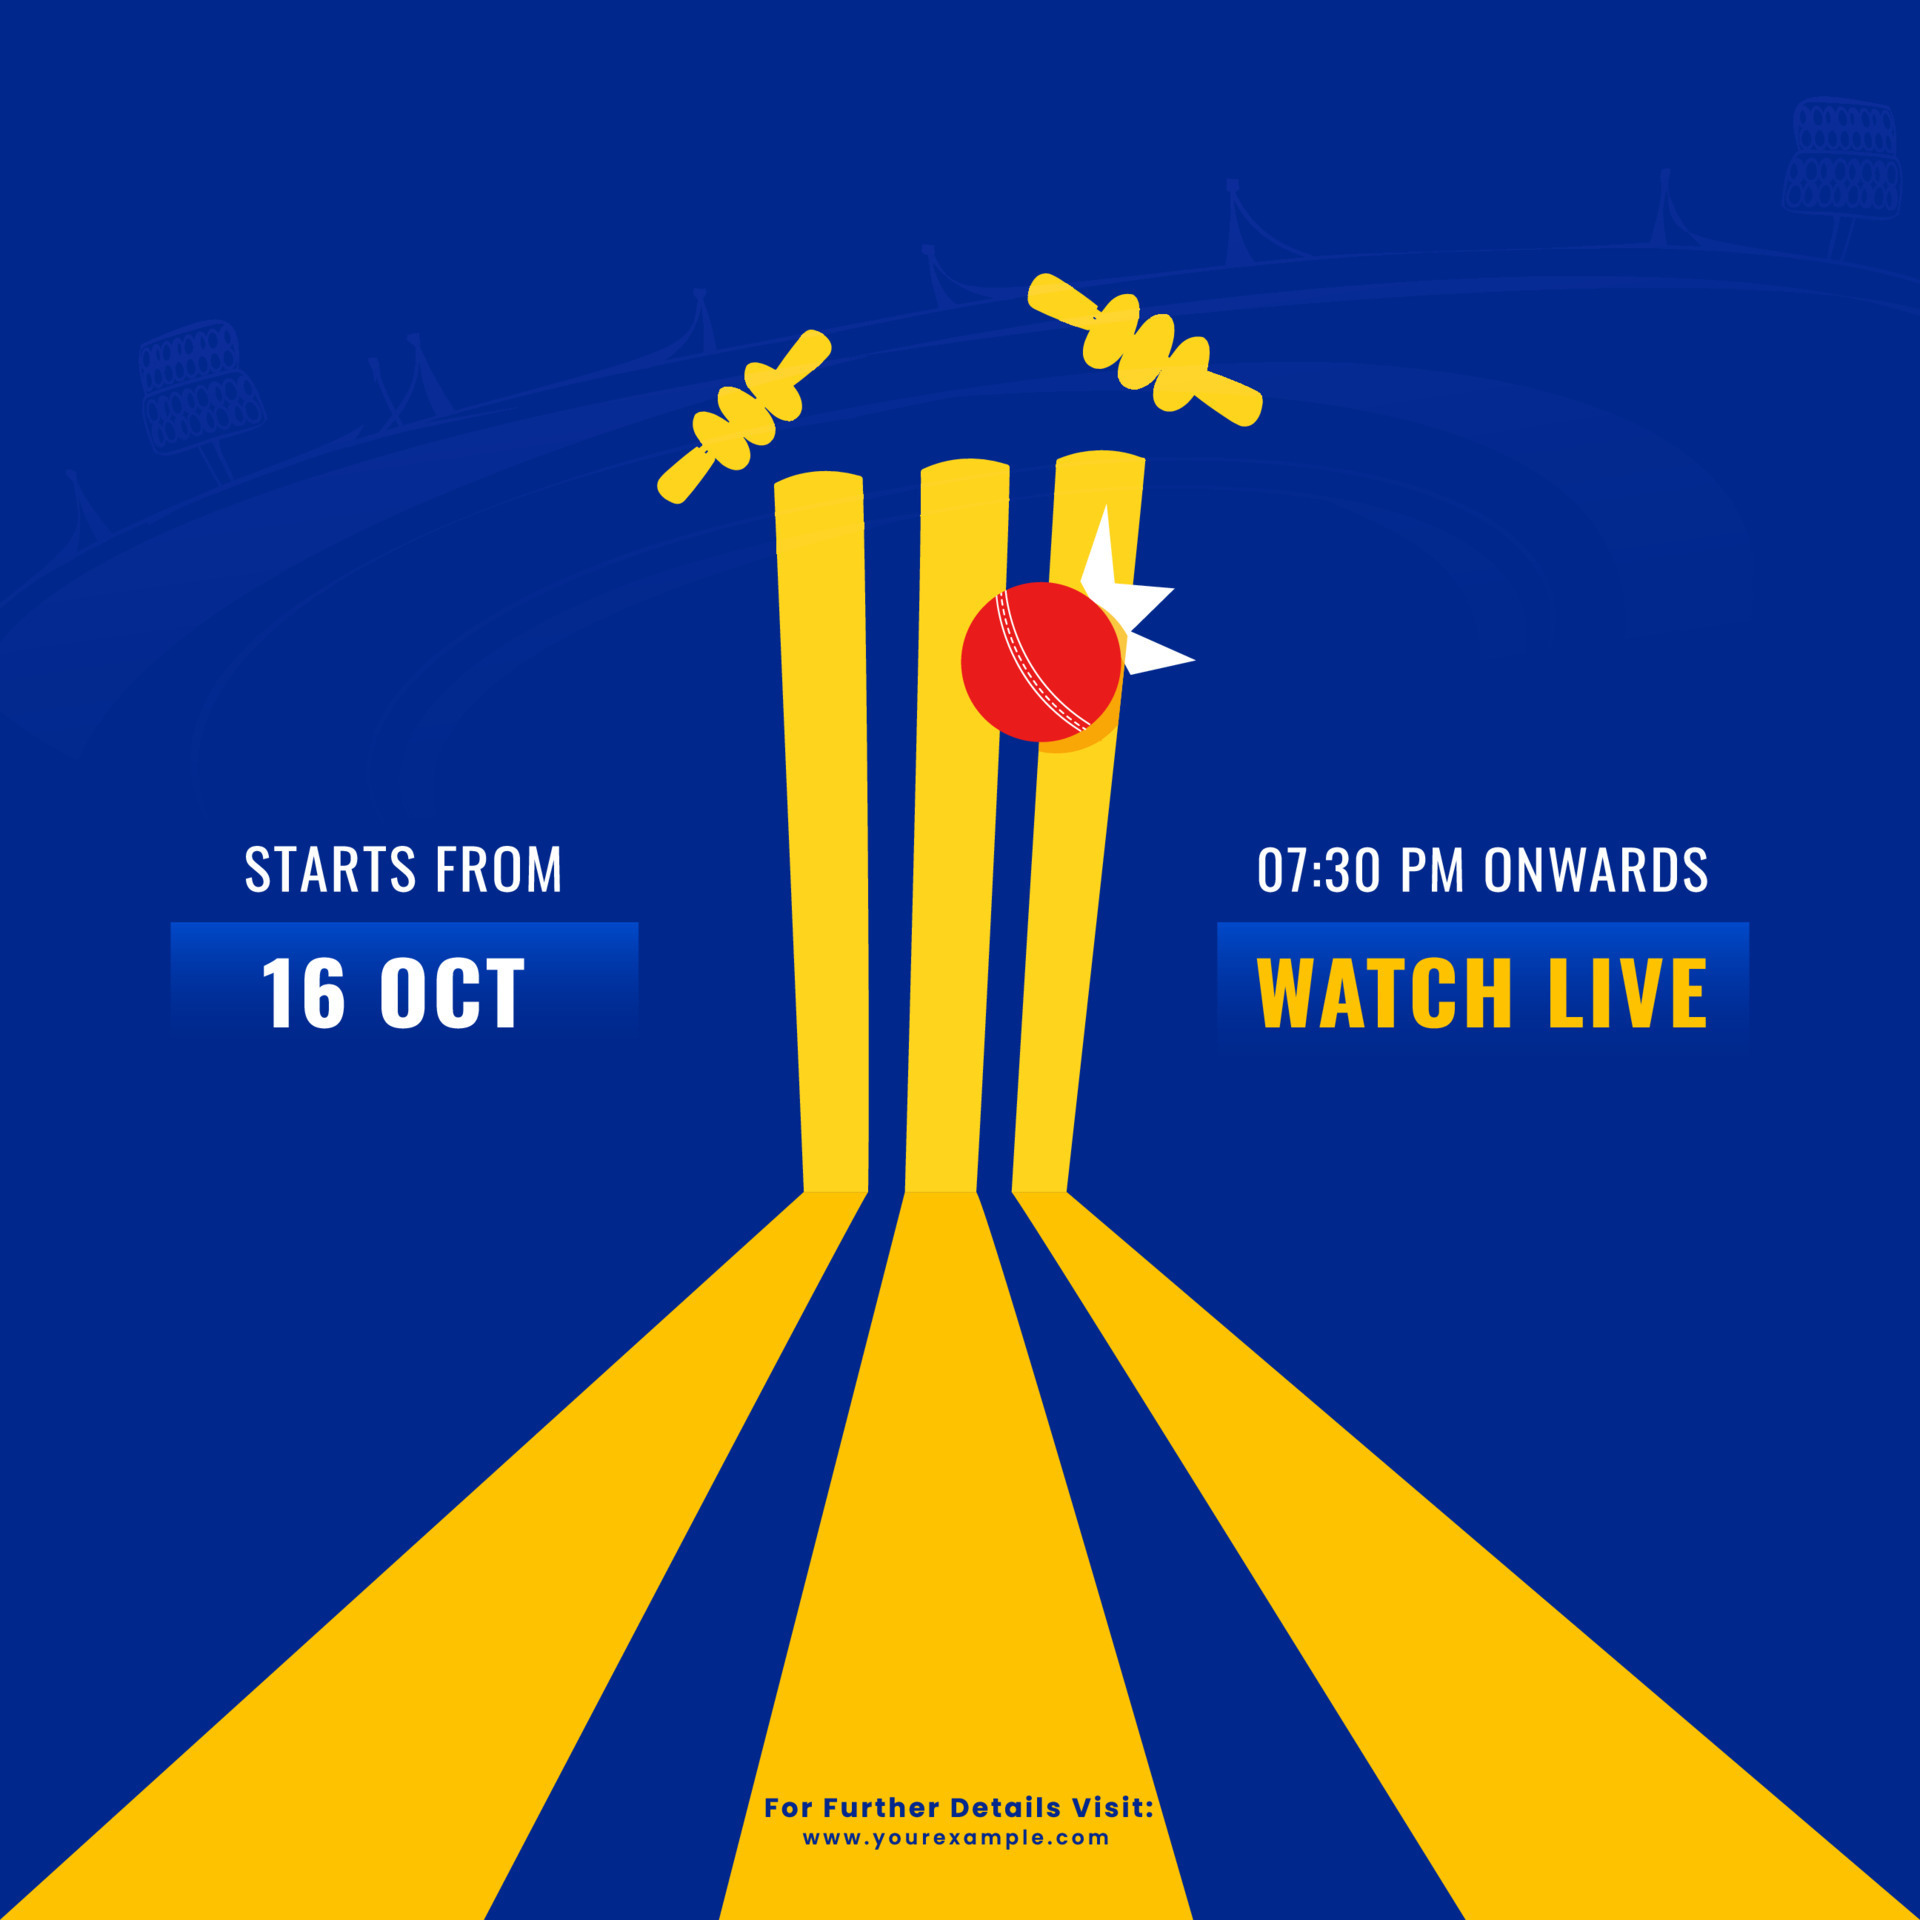 Watch Live Cricket Match Concept With Red Ball Hitting Wicket Stamp On Blue And Yellow Background